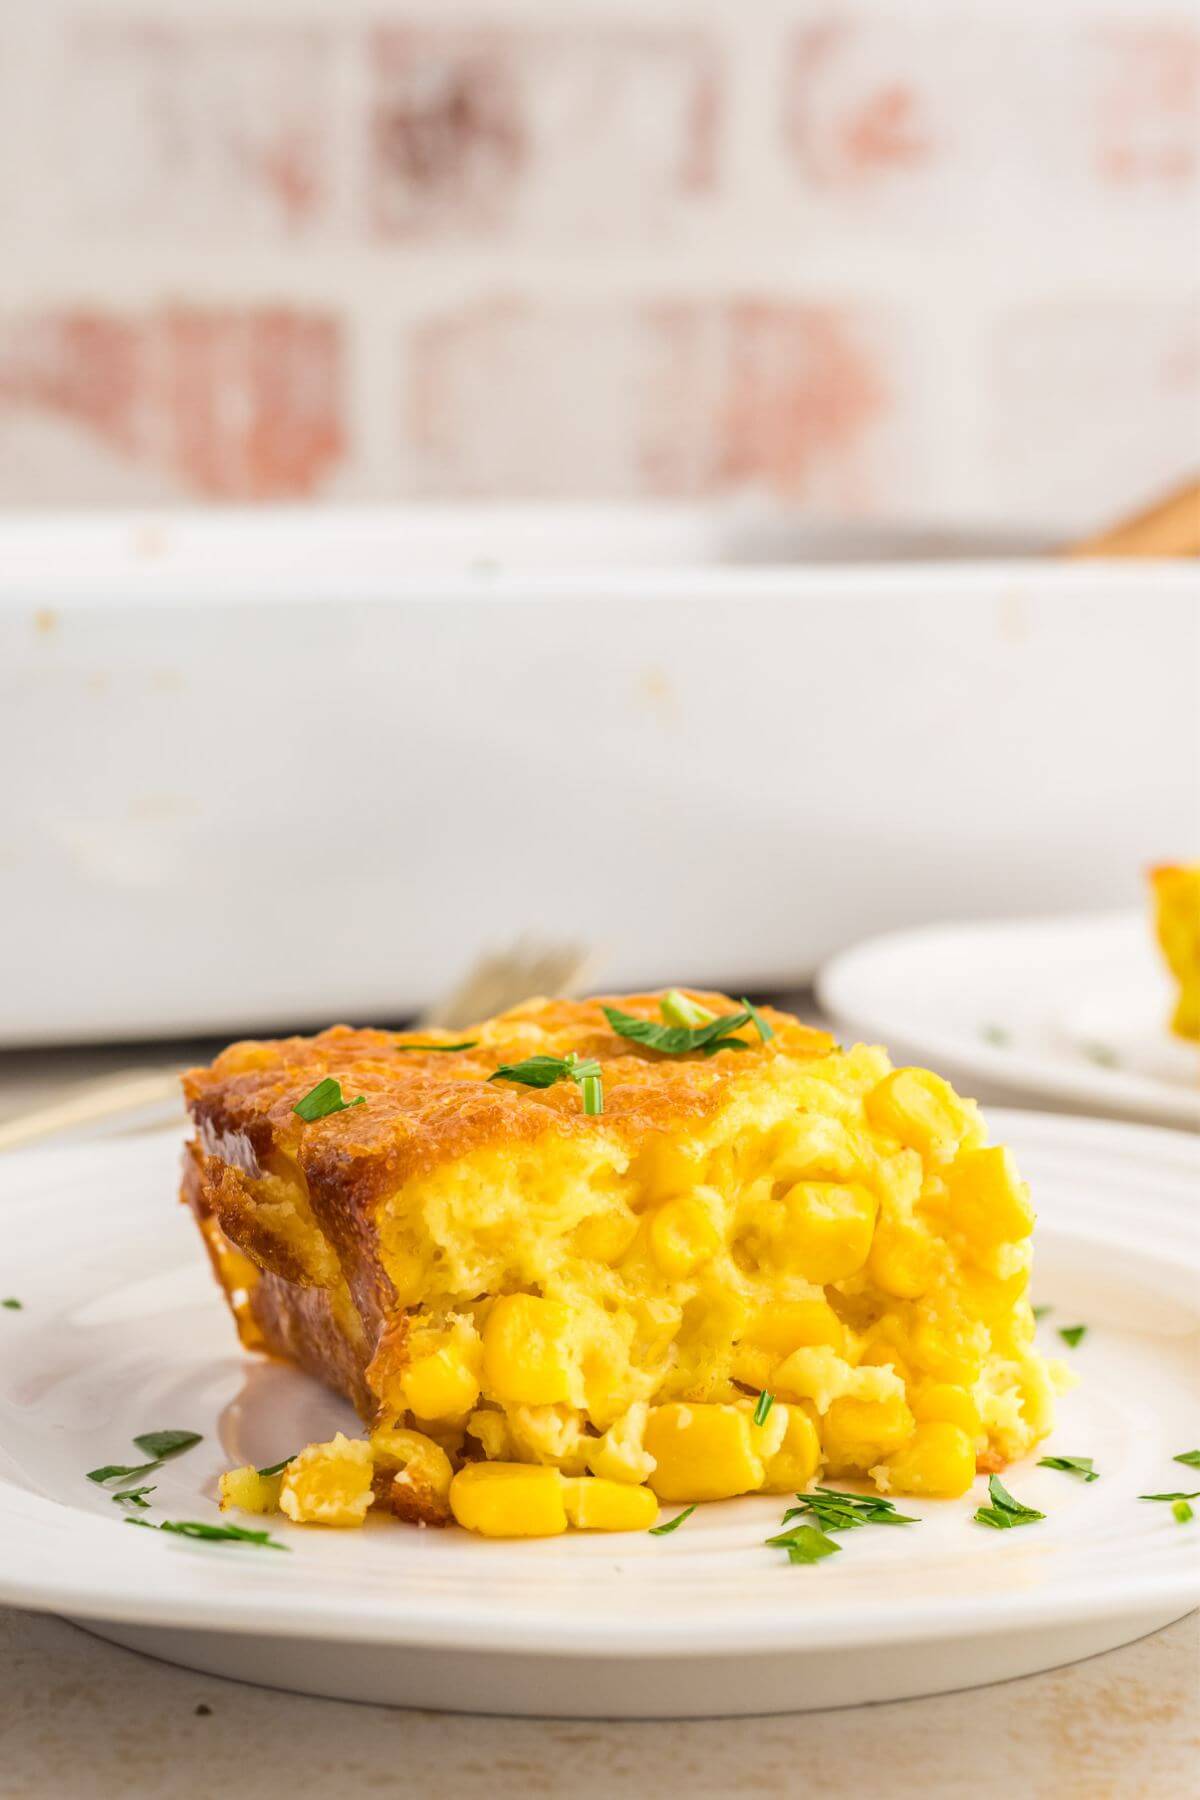 Plate with serving of corn pudding on the plate.